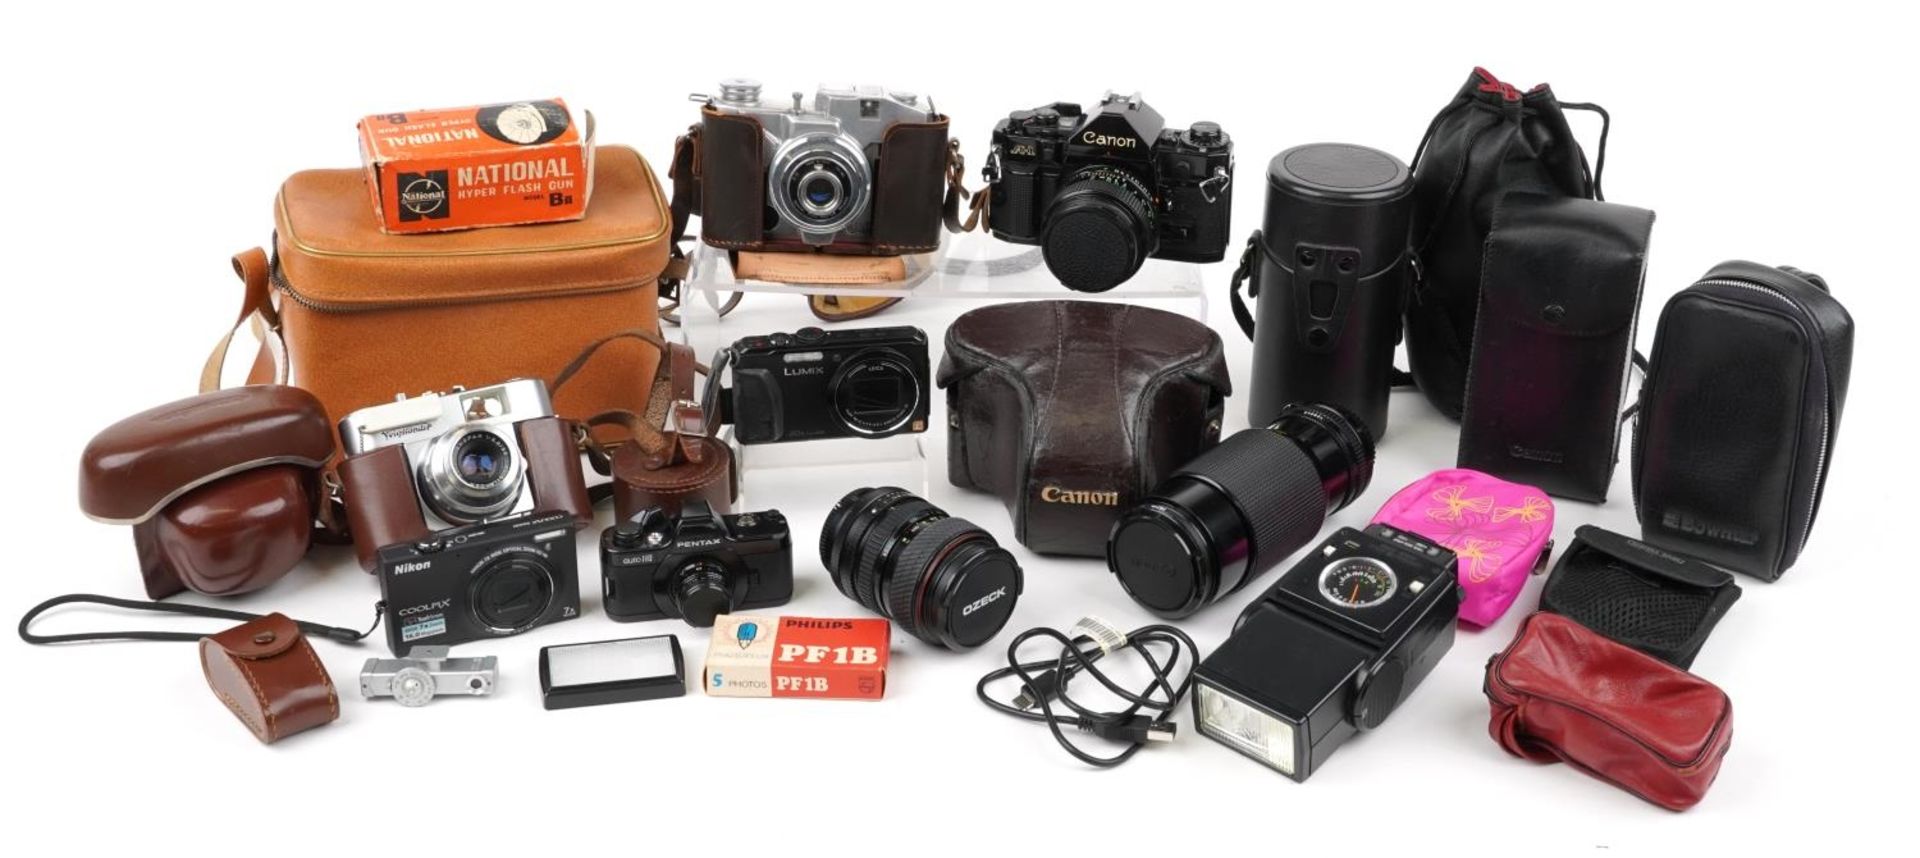 Vintage and later cameras, lenses and accessories including Koroll S, Tokina 28-70mm lens, Canon